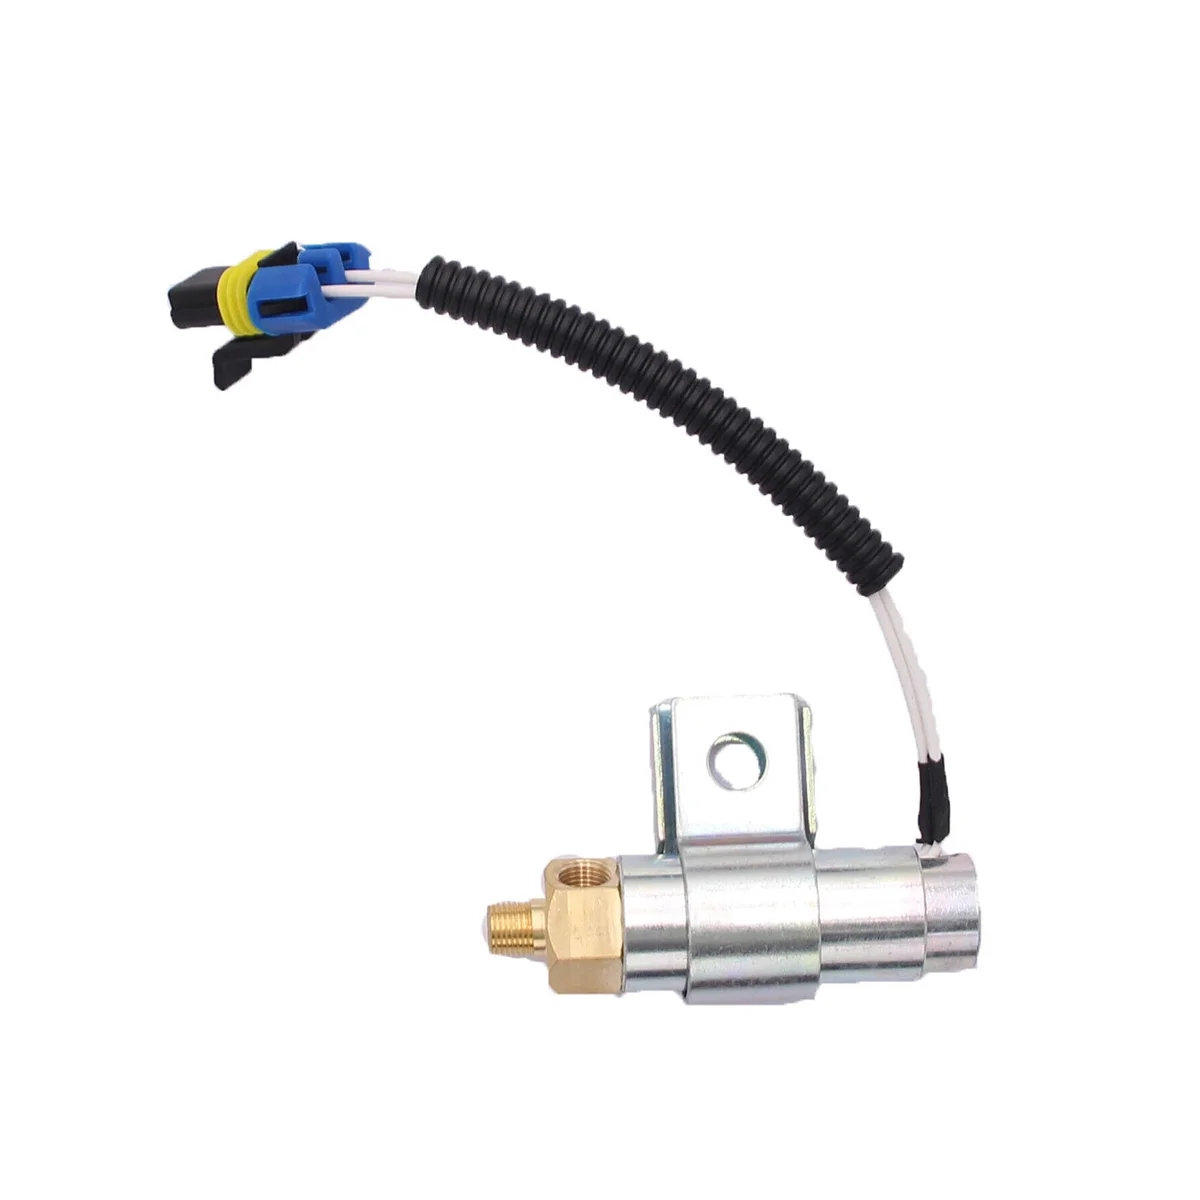 

Fan Clutch High Temp Air Solenoid Valve A06-26631-000 F224904 5020-1 85020-1 for Freightliner